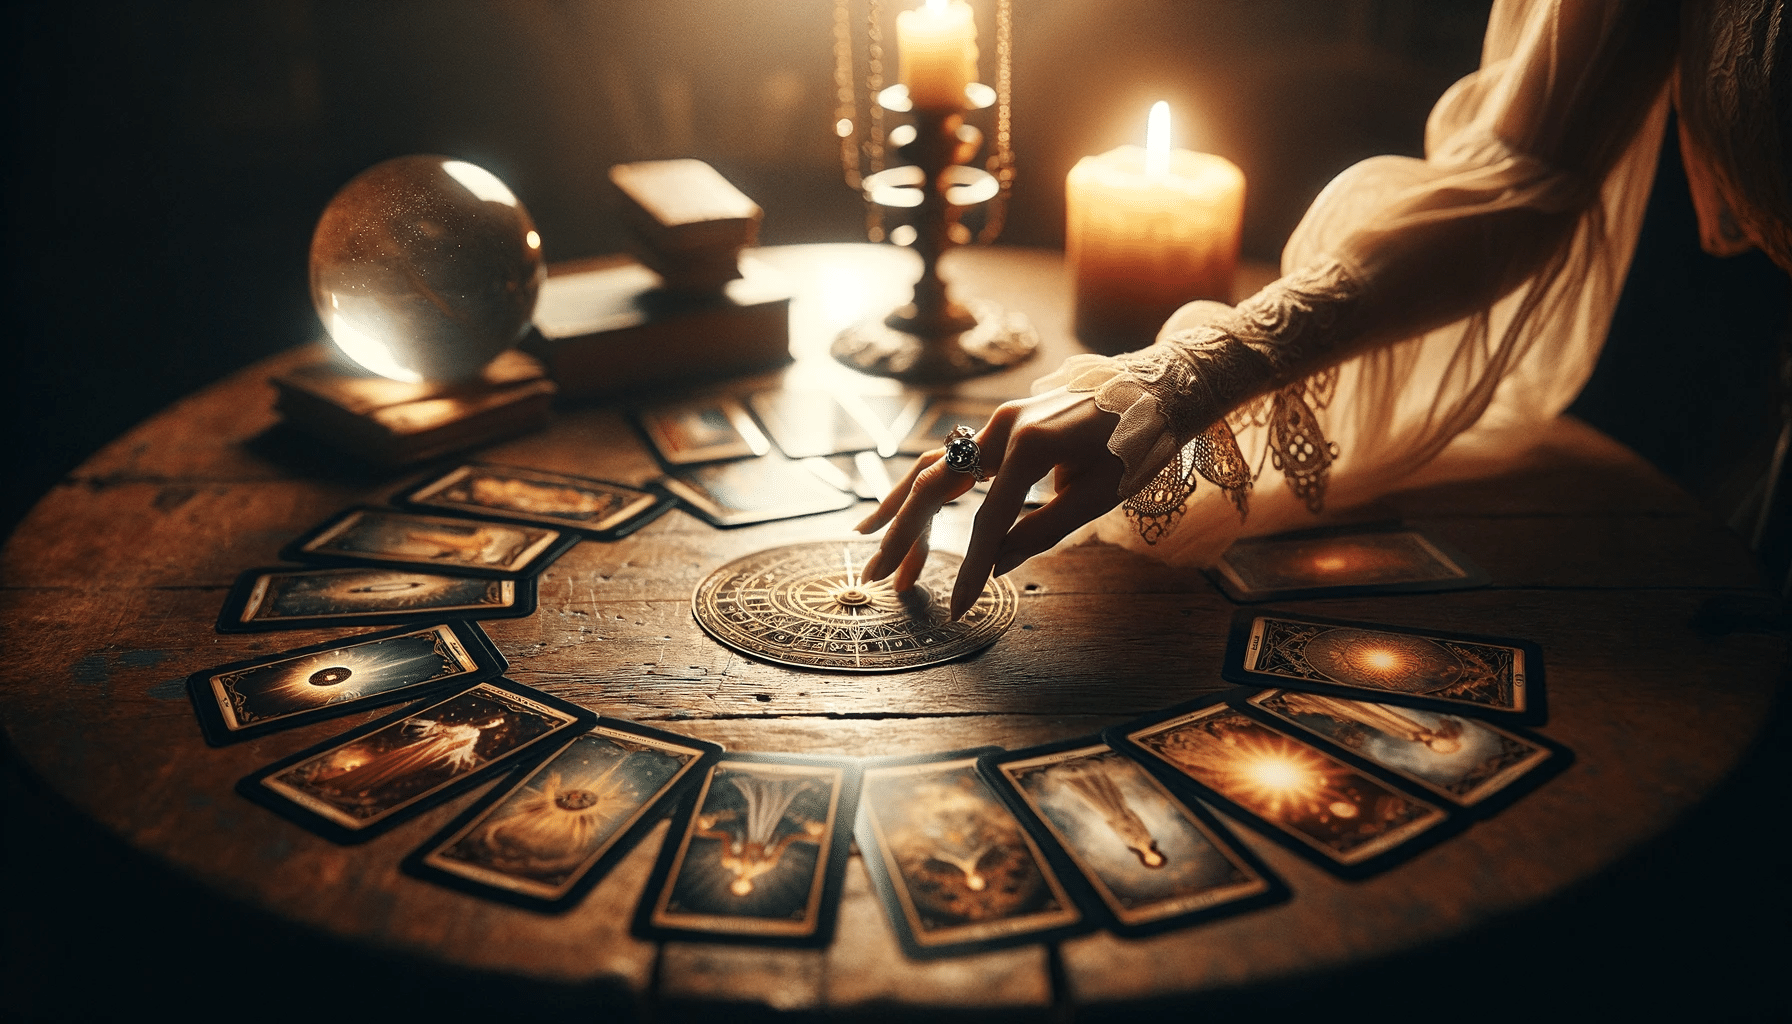 12 Tips For Interpreting Tarot Cards For Self-Discovery